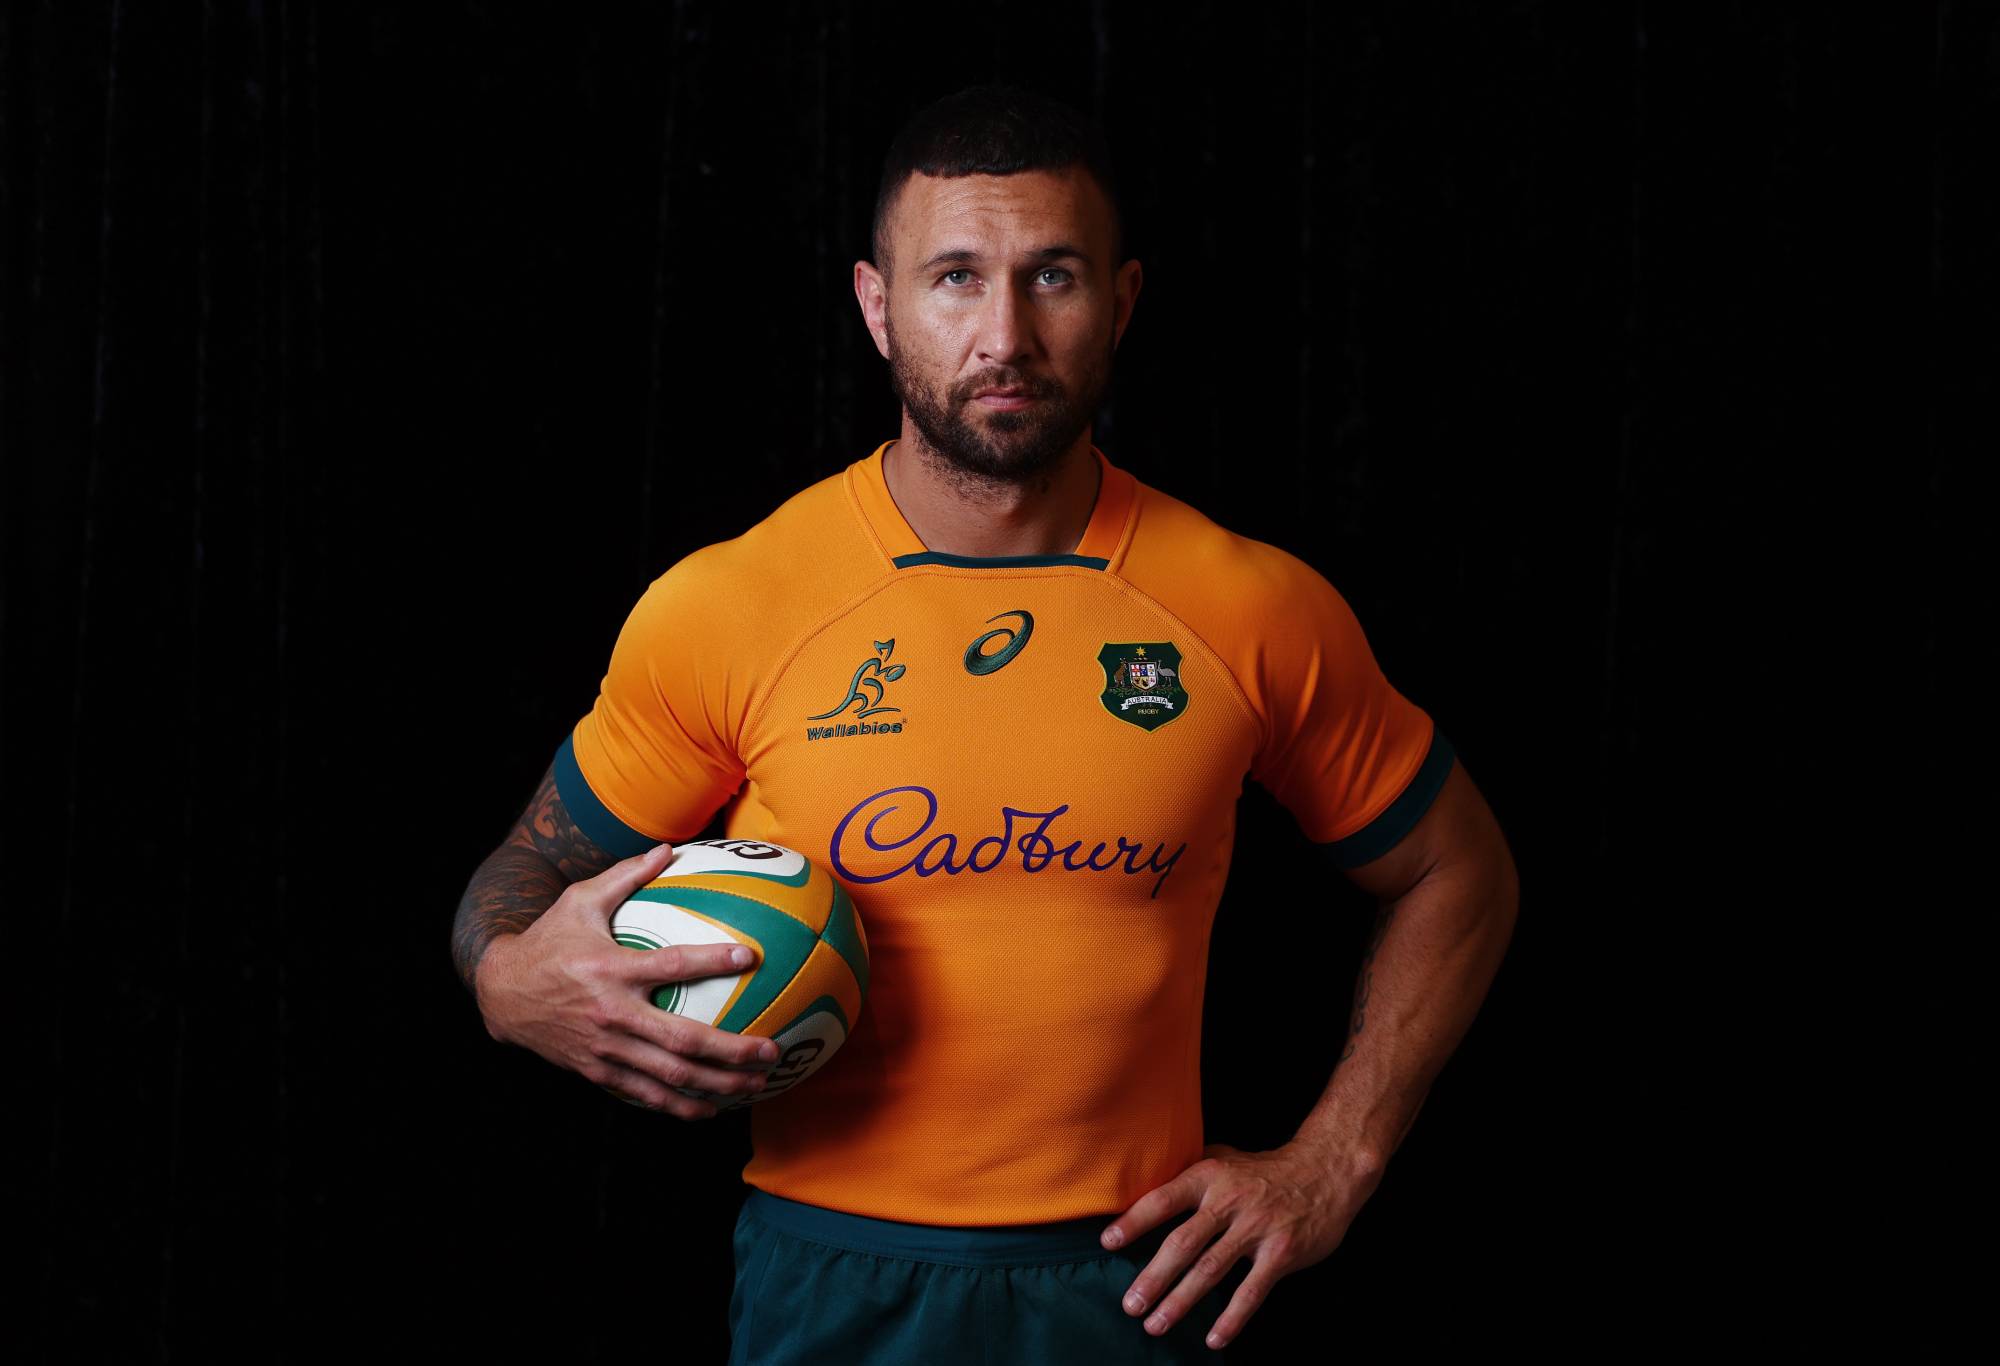 Quade Cooper poses during an Australian Wallabies training session at Royal Pines Resort on July 27, 2022 in Gold Coast, Australia. (Photo by Chris Hyde/Getty Images)